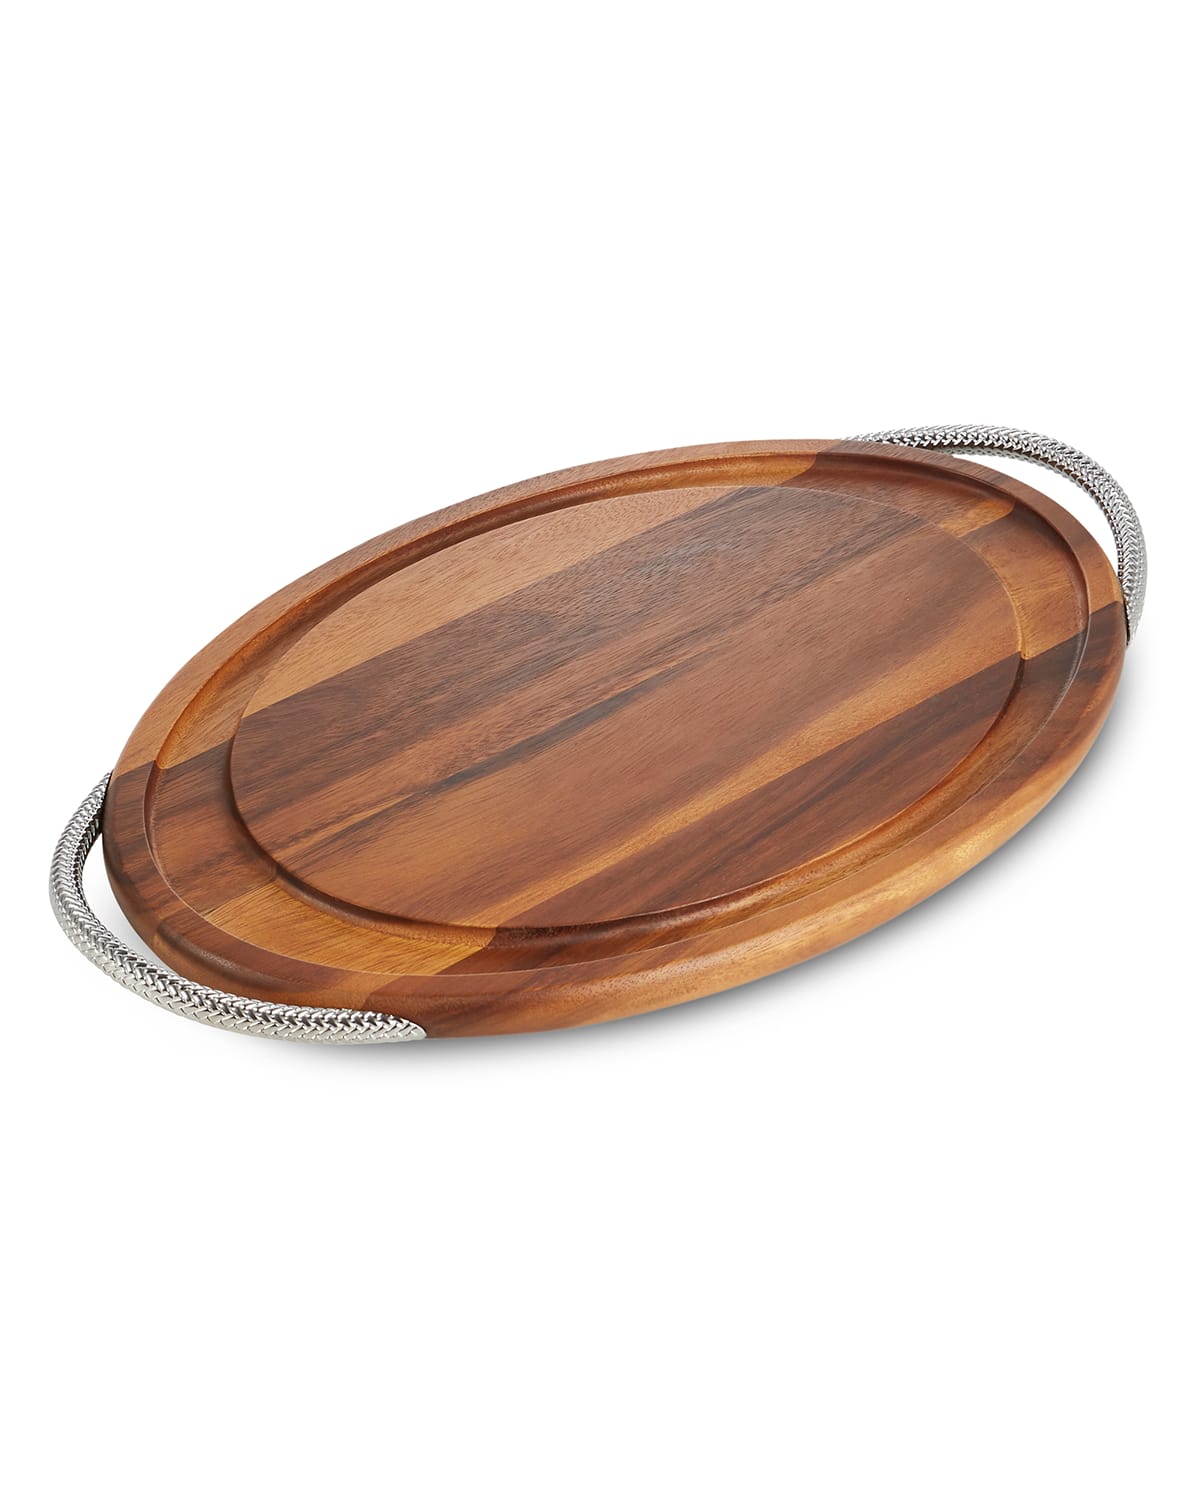 Shop Nambe Braid Carving Board In Brown And Silver